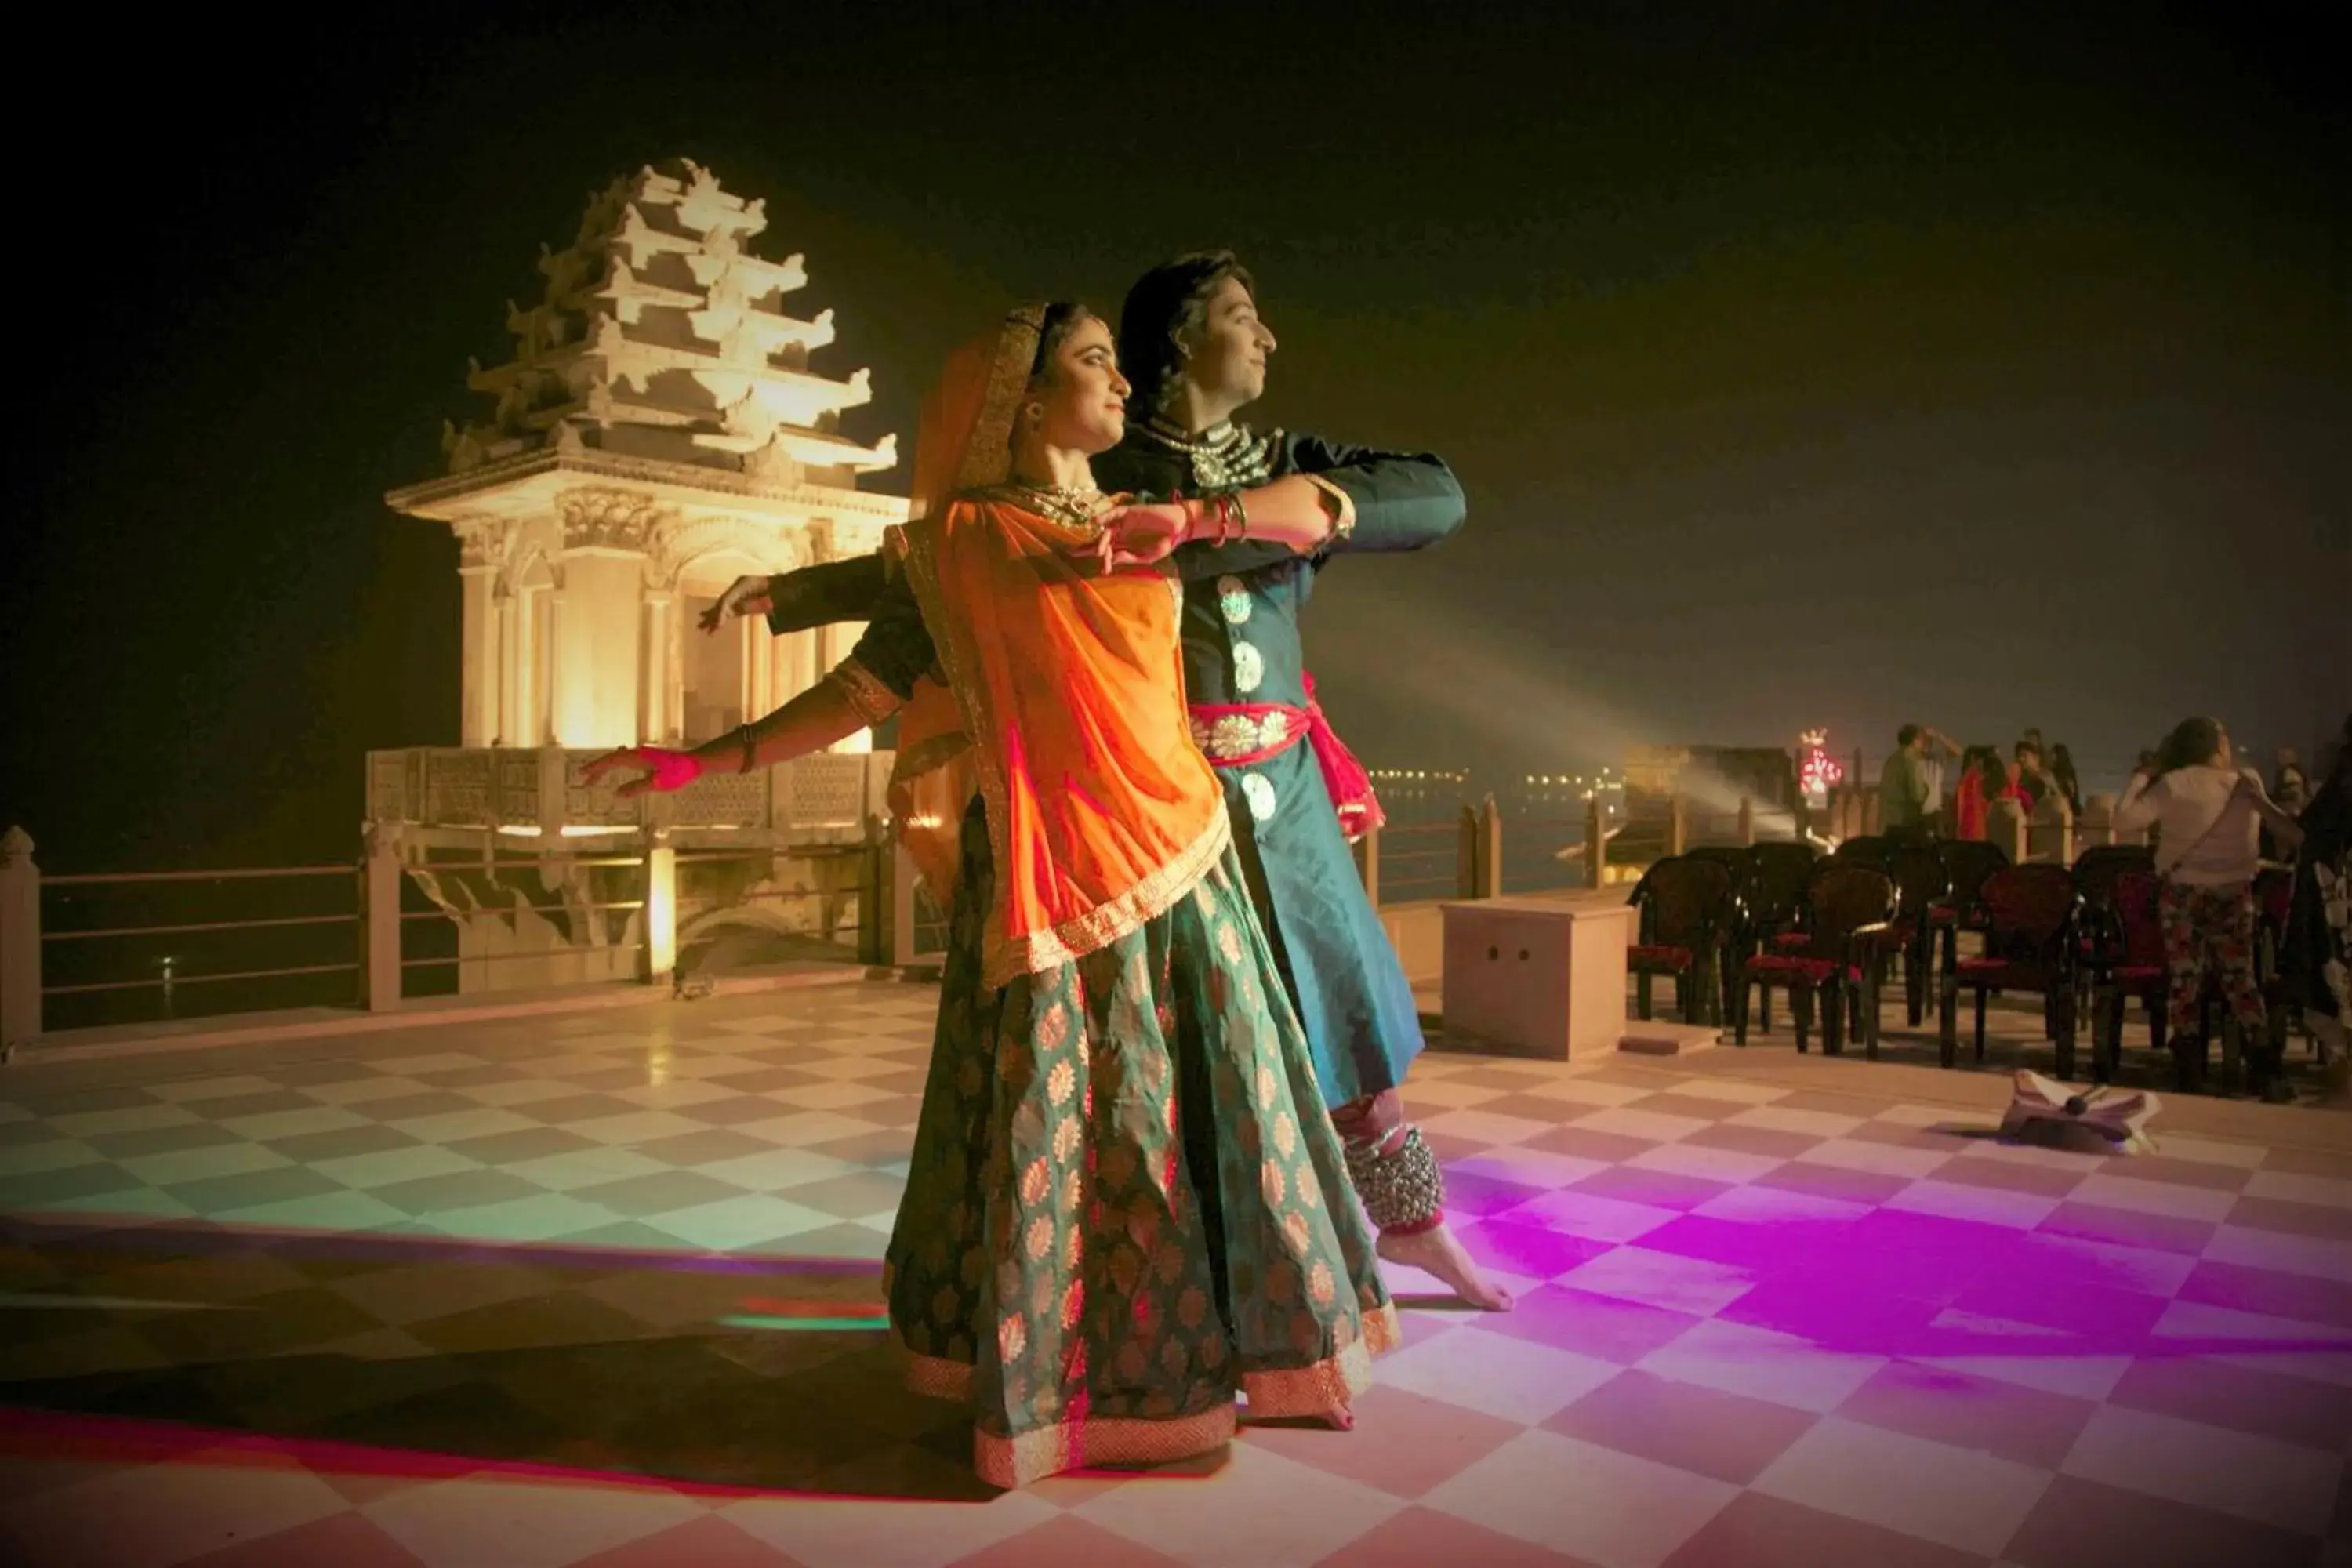 Evening entertainment in BrijRama Palace, Varanasi by the Ganges